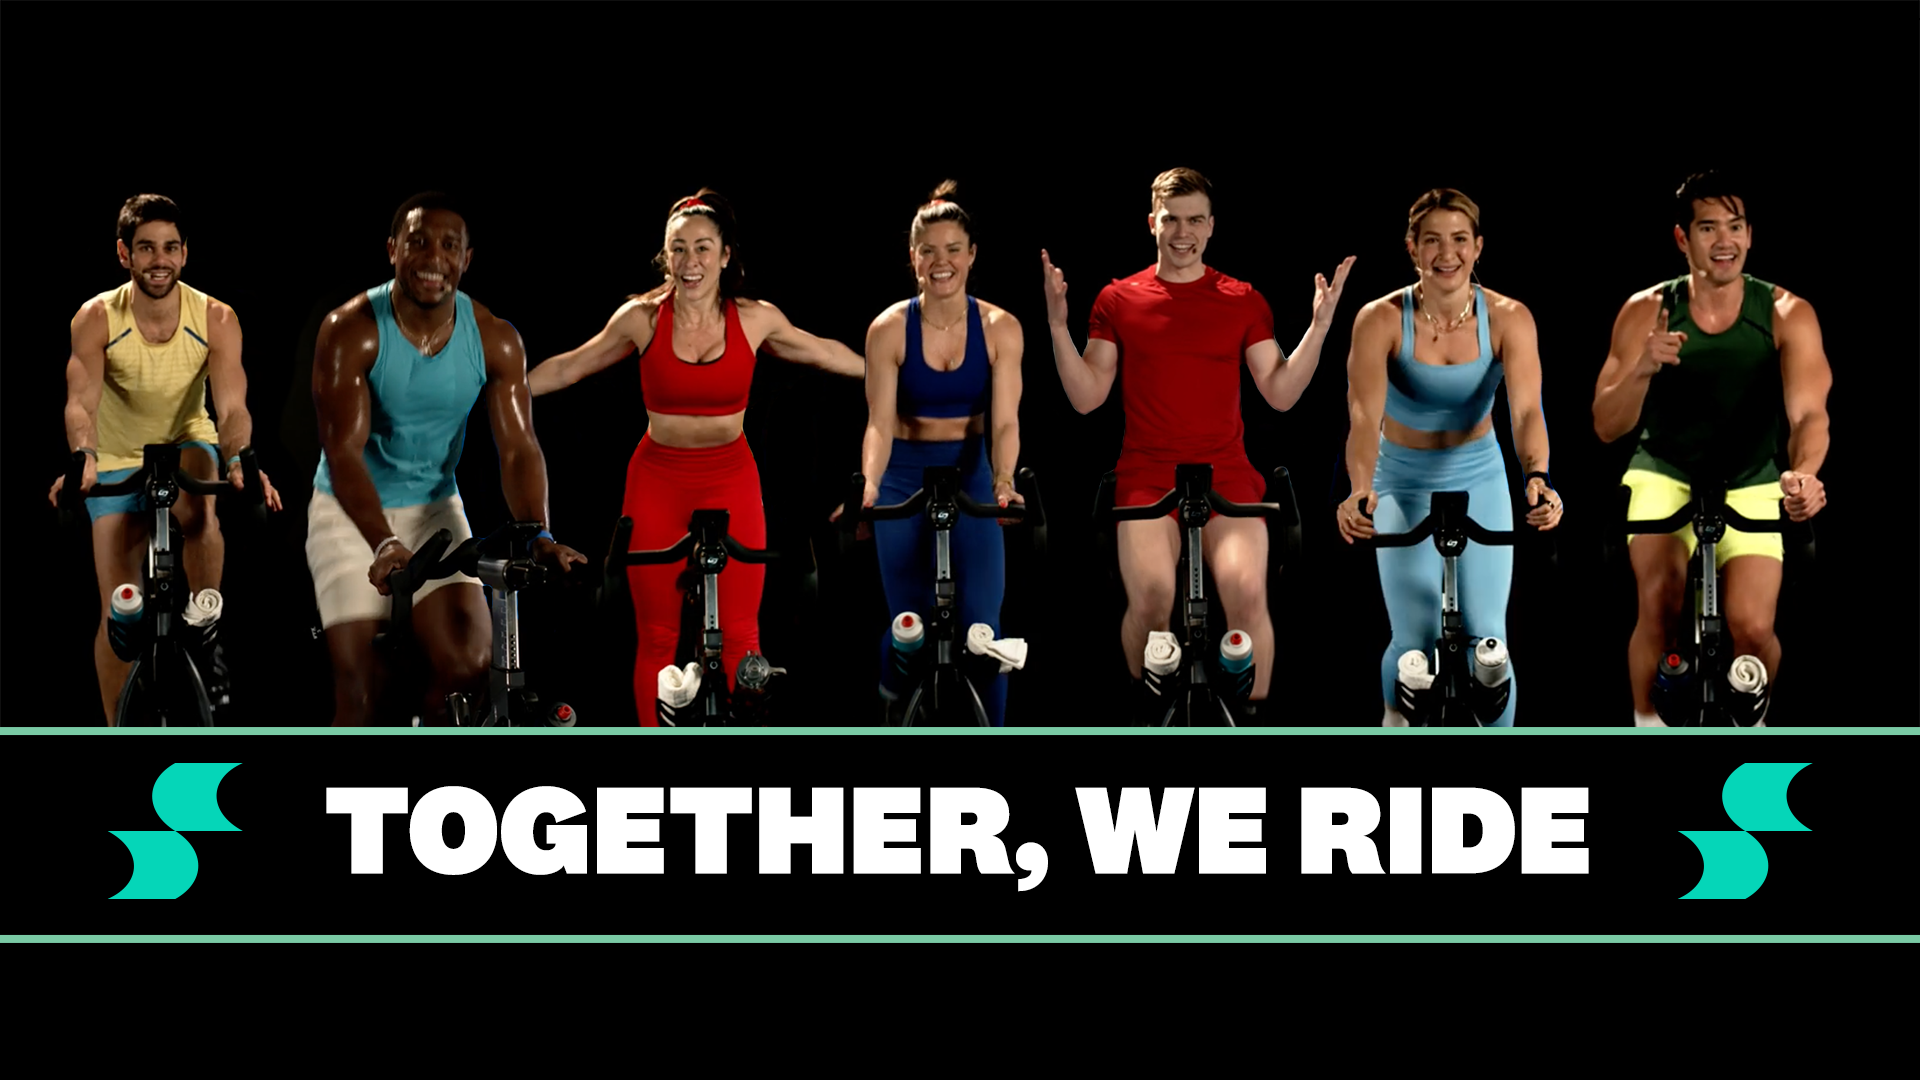 Together, we ride - Swerve is now live at our Overland Park location!